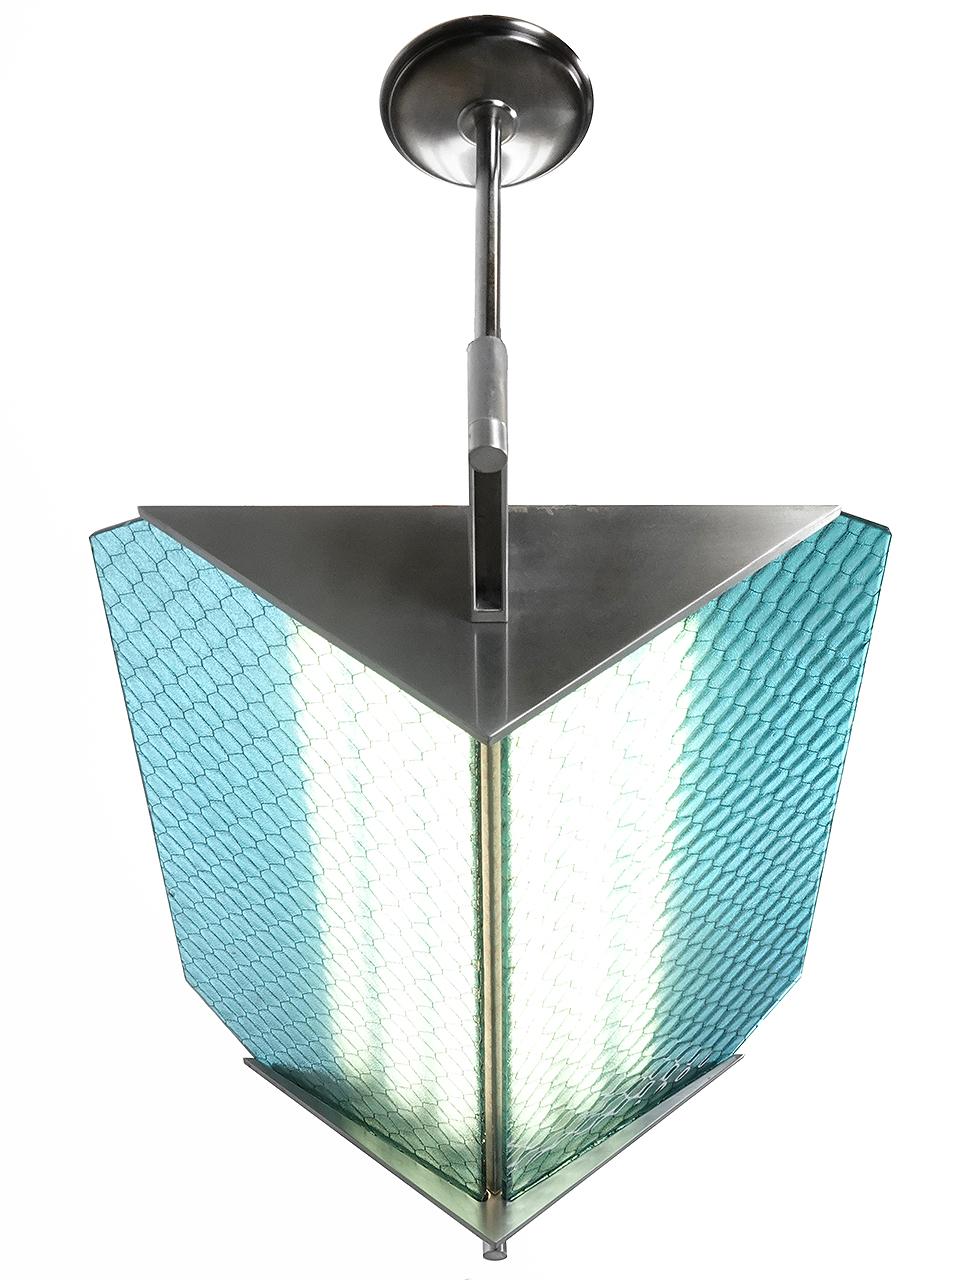 This is a clean high style modern lamp. The lines are very clean and simple using brushed aluminum. What makes it a bit edgy is the generous use of antique sky blue wire glass. We can change the down rods to suit your drop length. We only have one